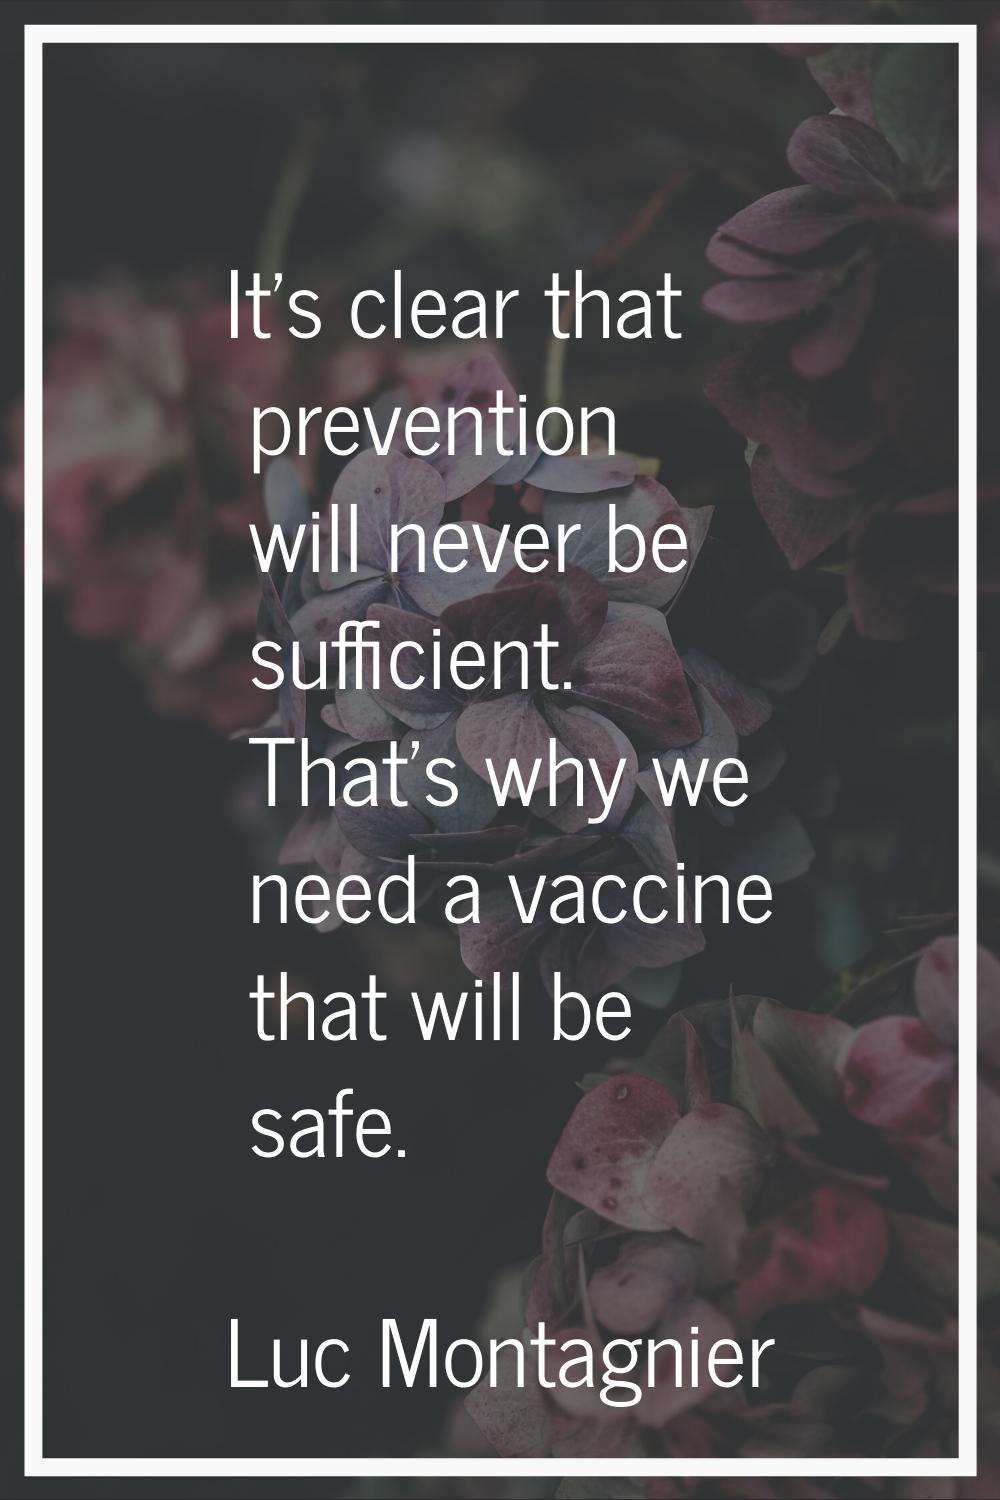 It's clear that prevention will never be sufficient. That's why we need a vaccine that will be safe